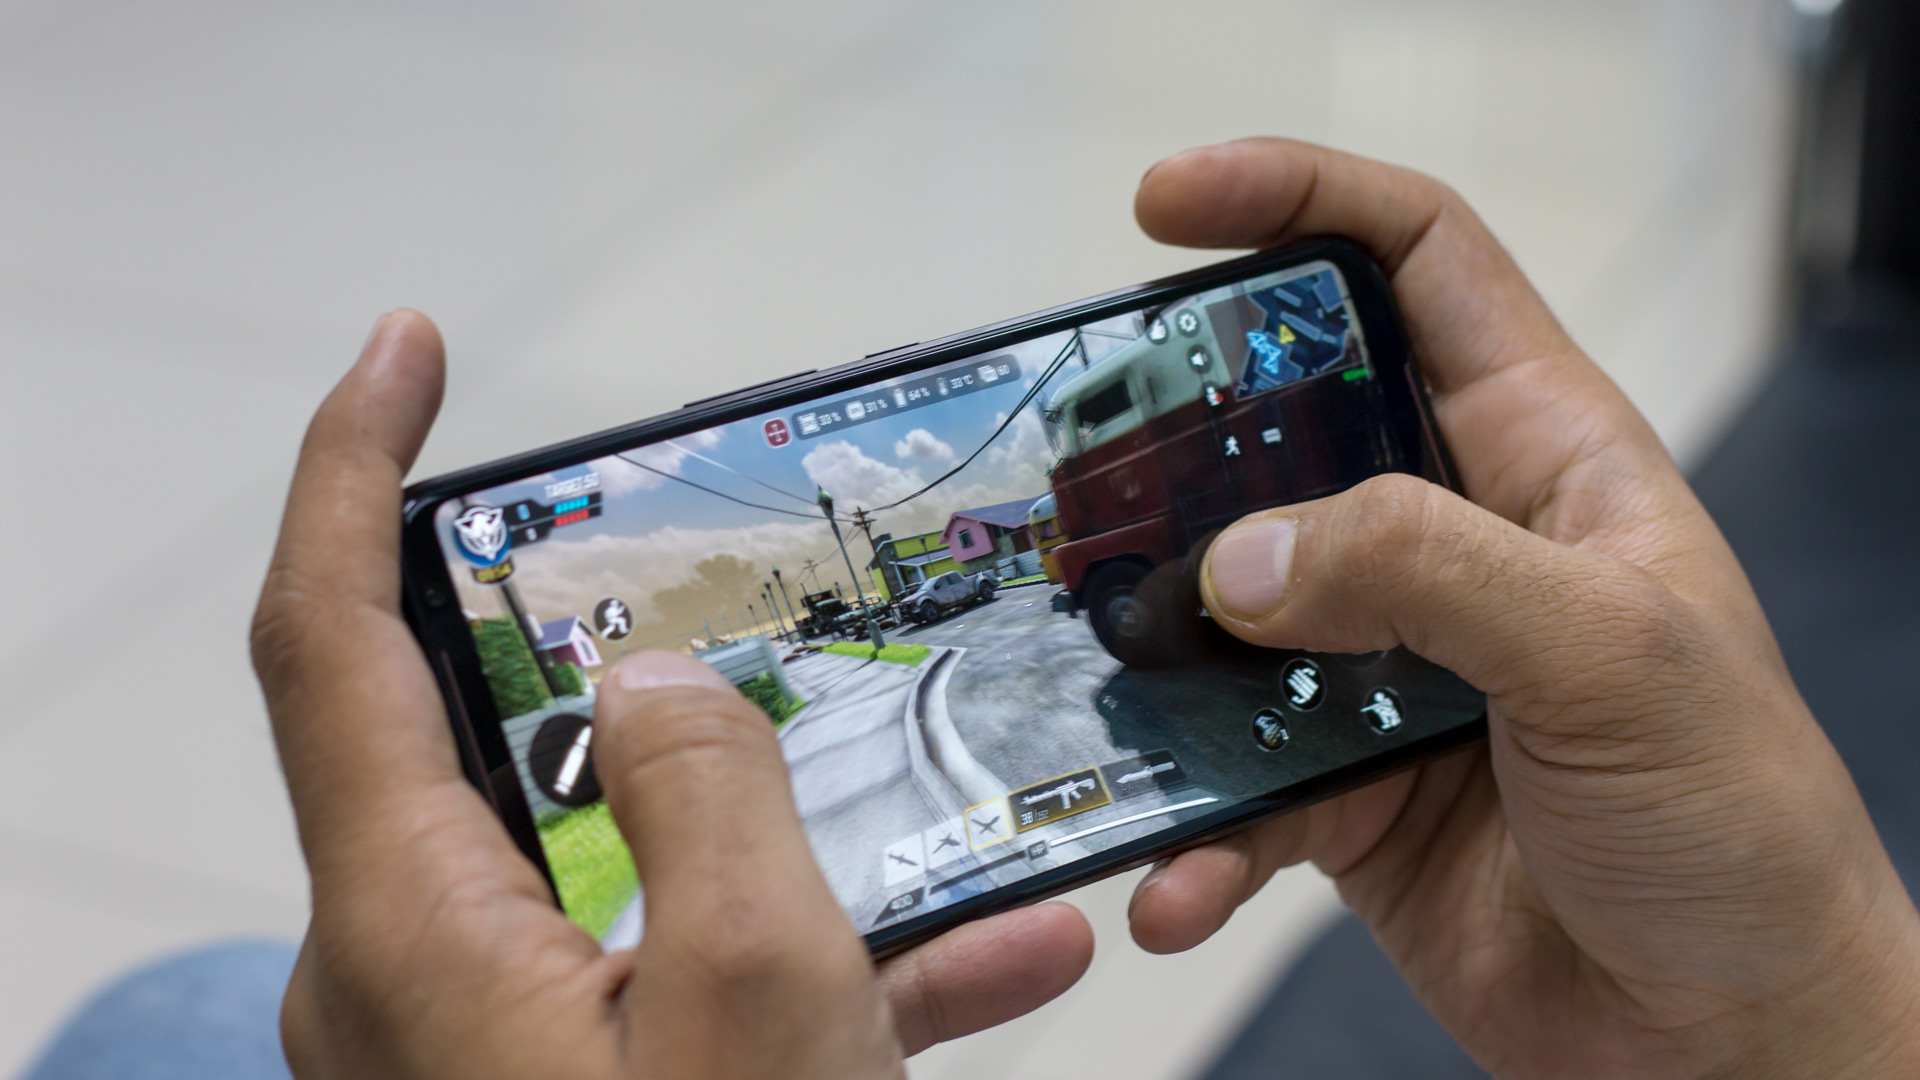 5 best Android games for 2 GB RAM smartphones